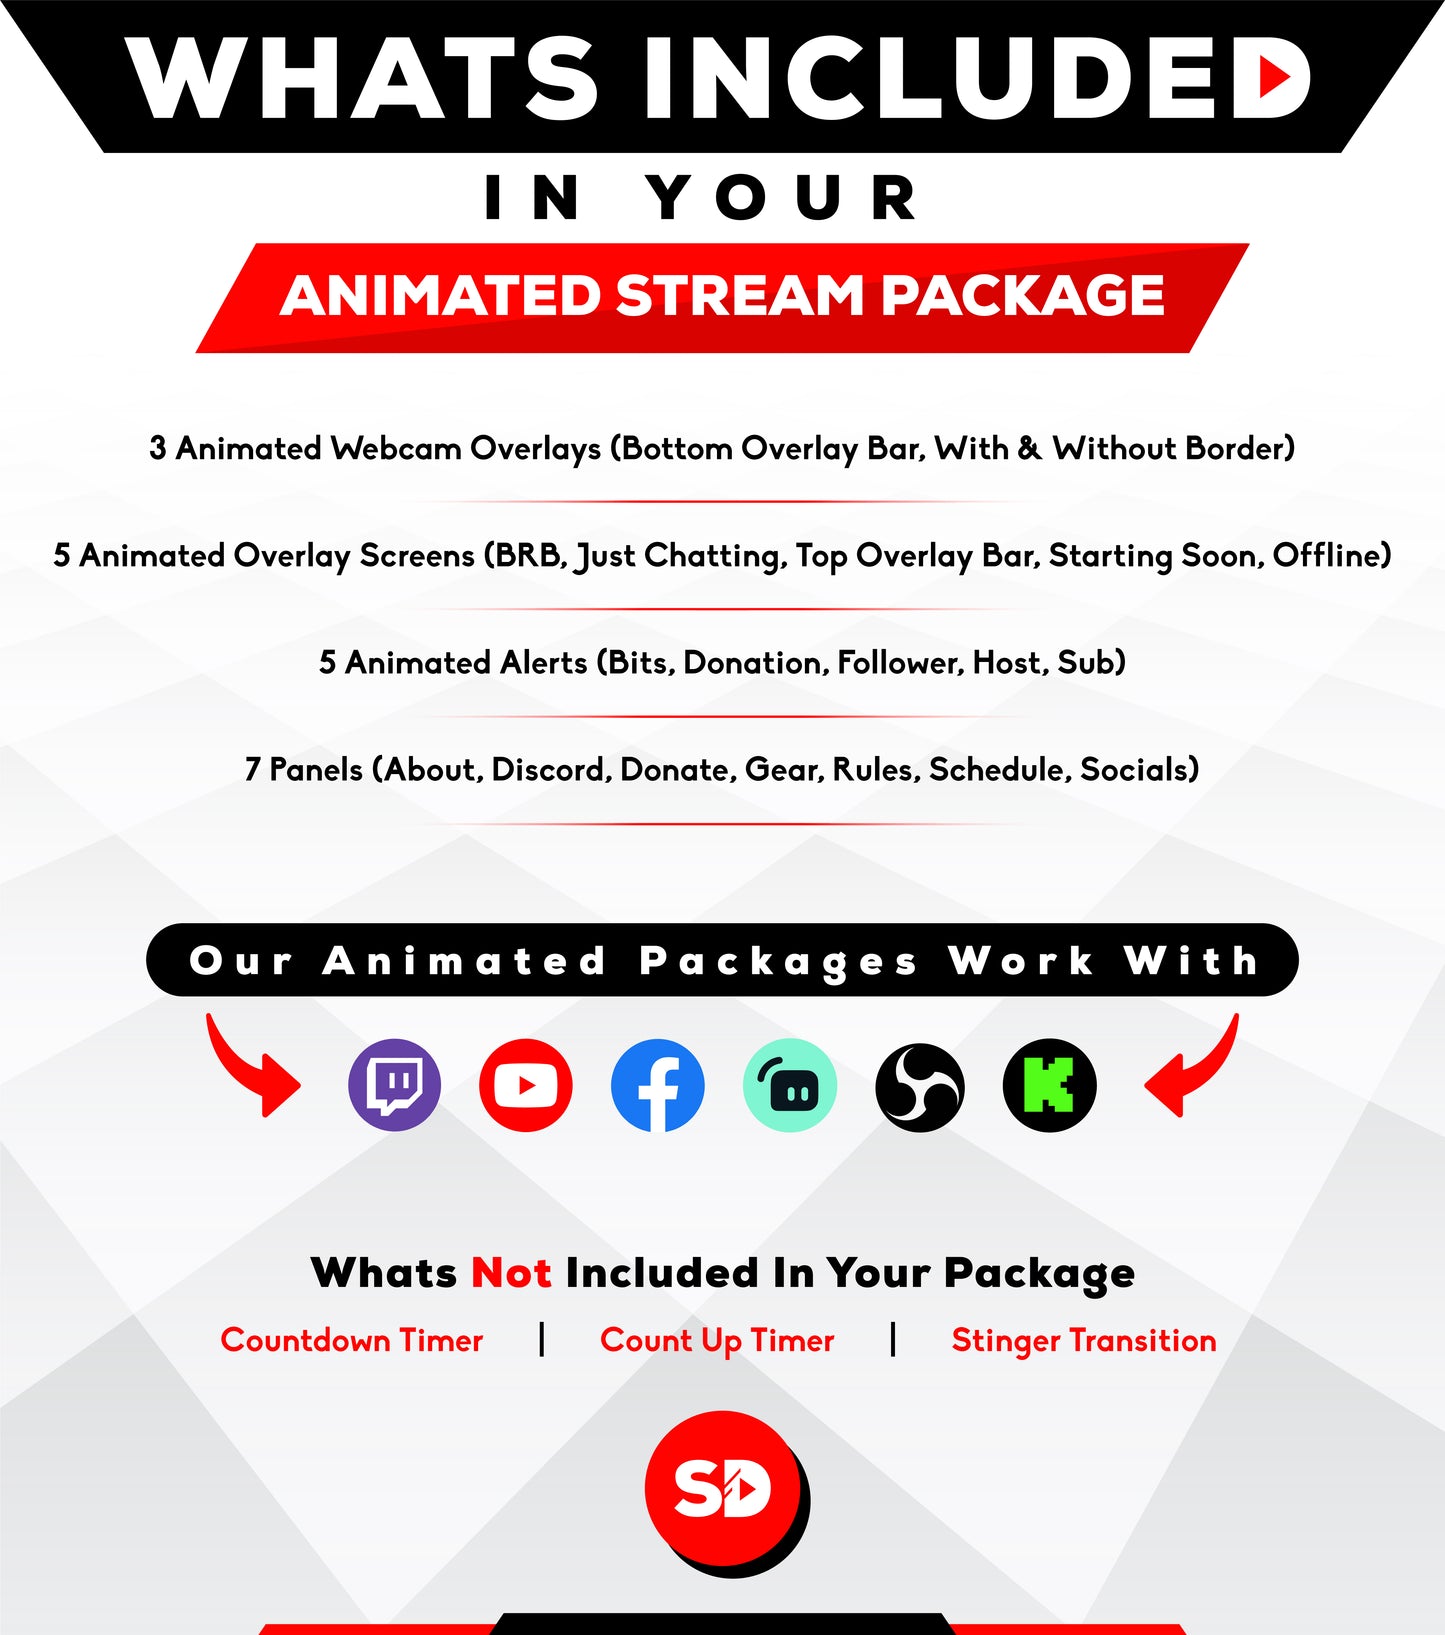 whats included in your package - animated stream package - monochrome - stream designz